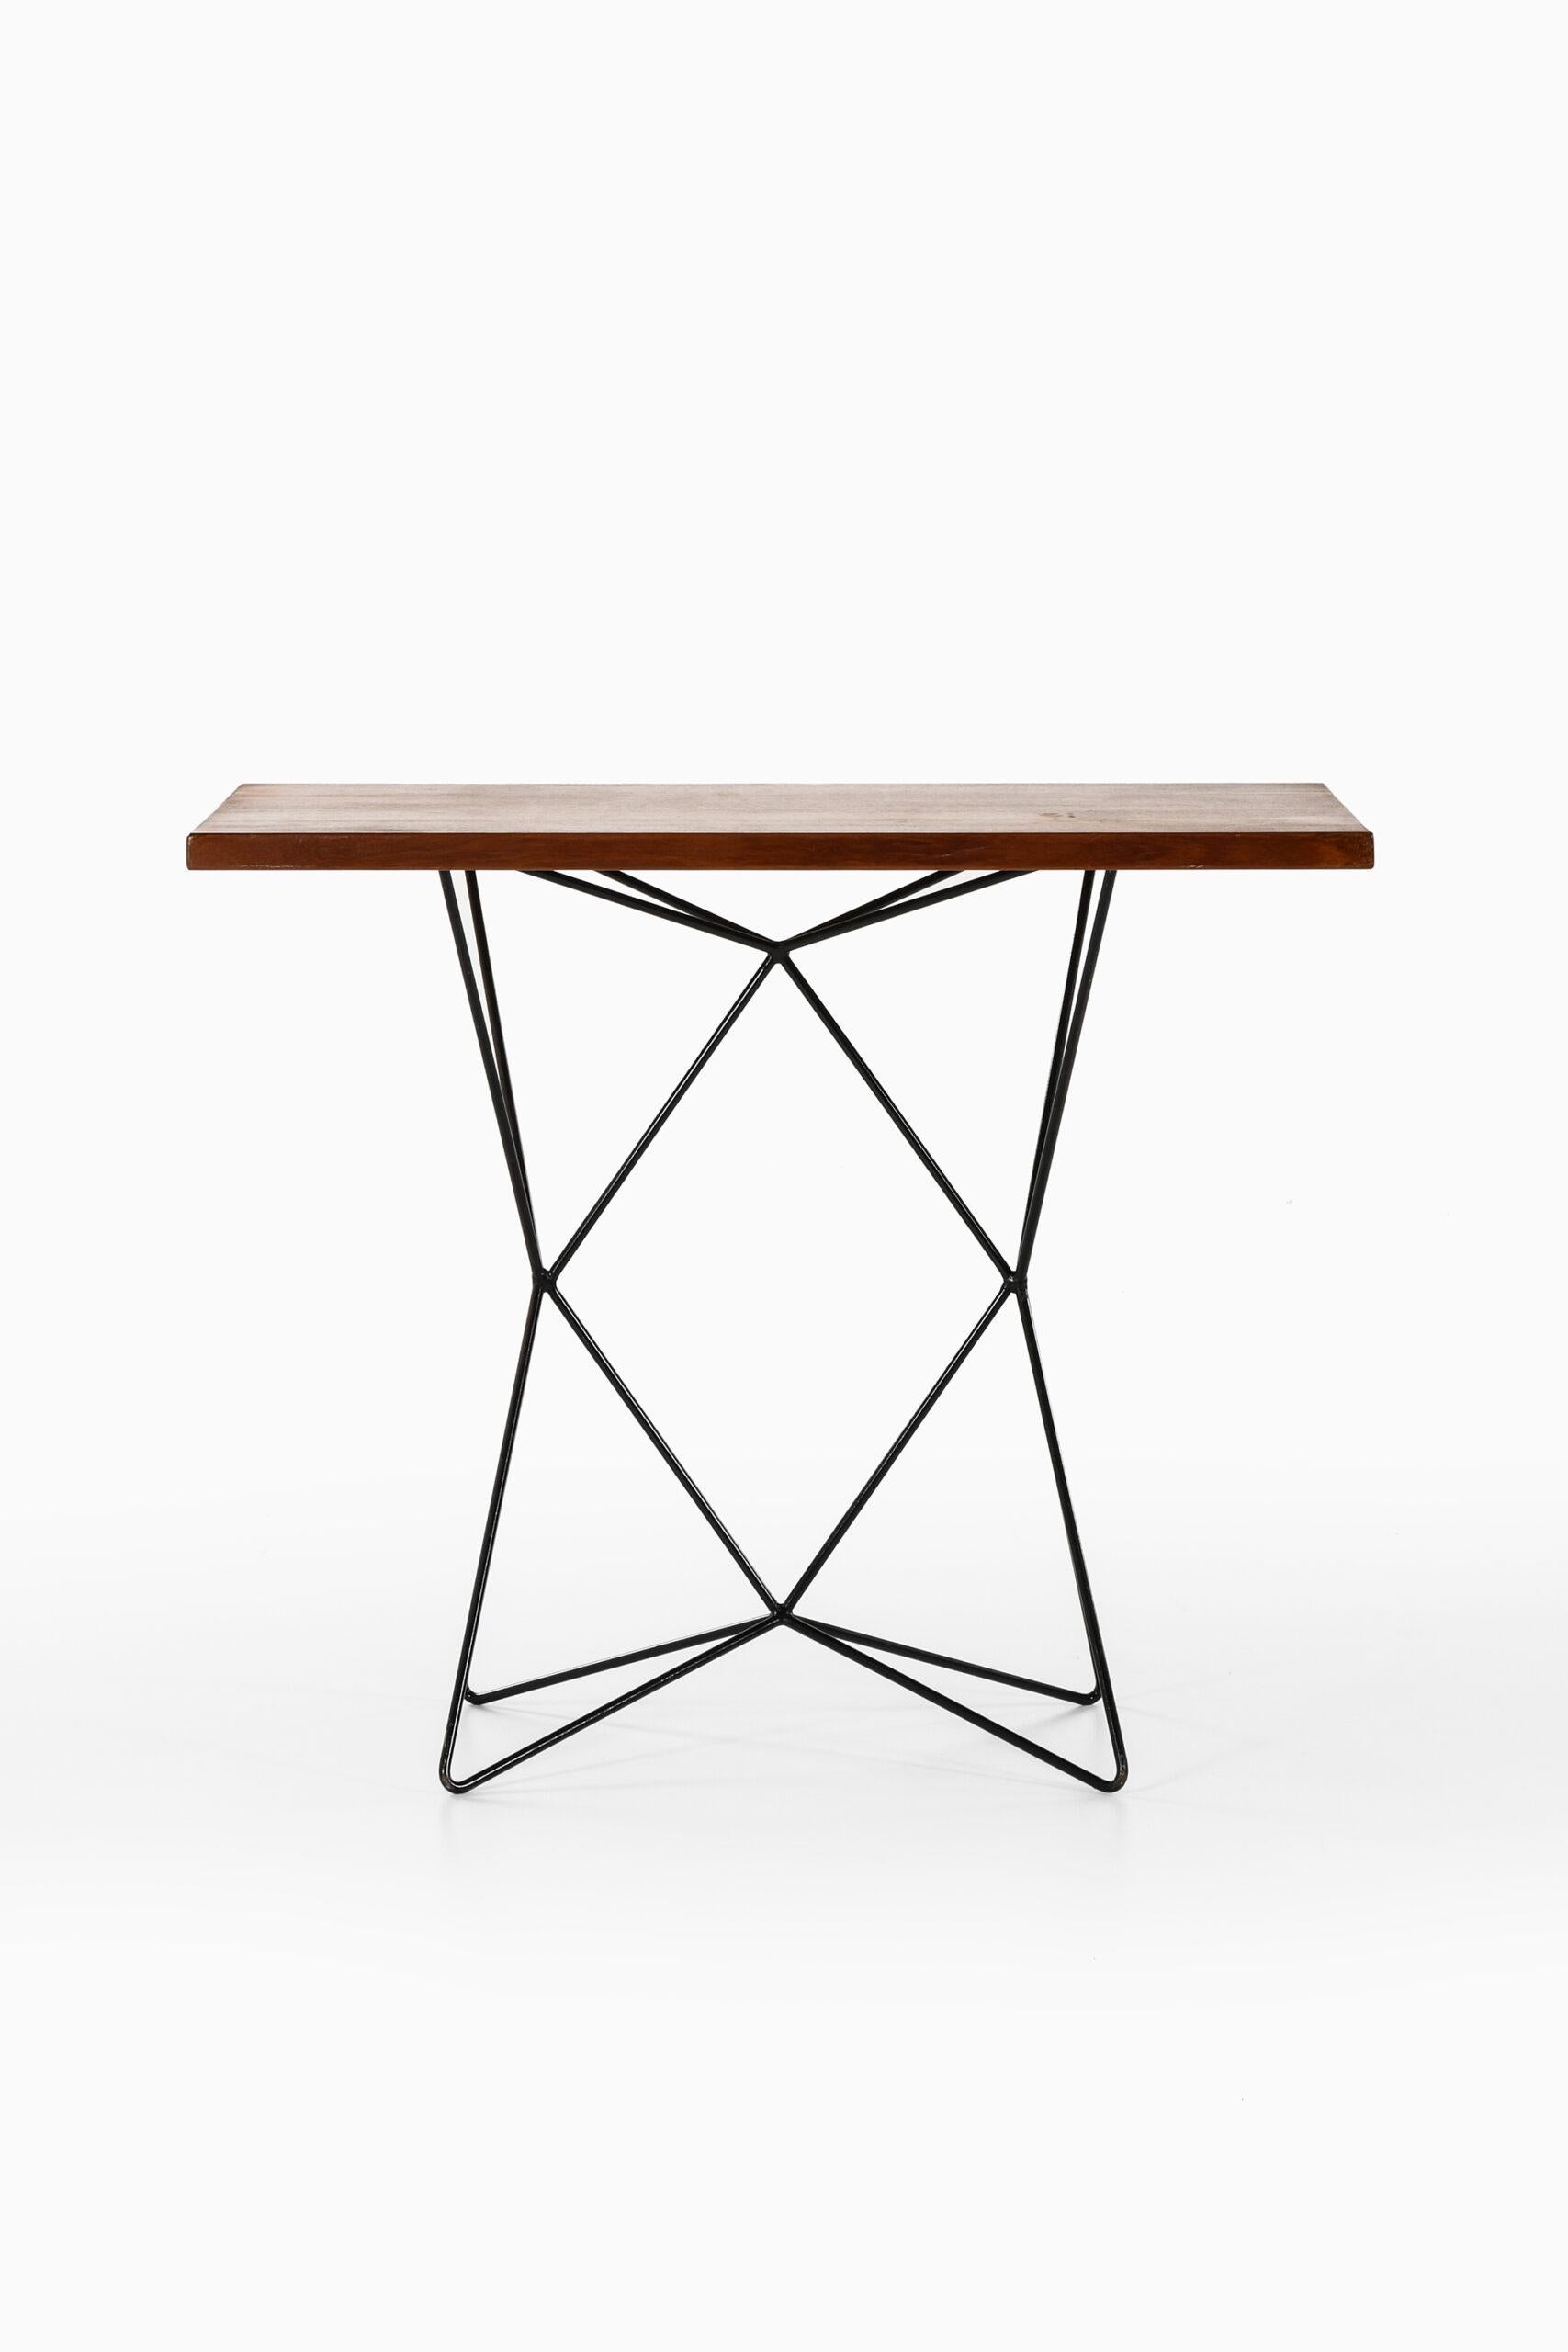 Swedish Bengt Johan Gullberg Table Model A2 Produced by Gullberg Trading Company For Sale